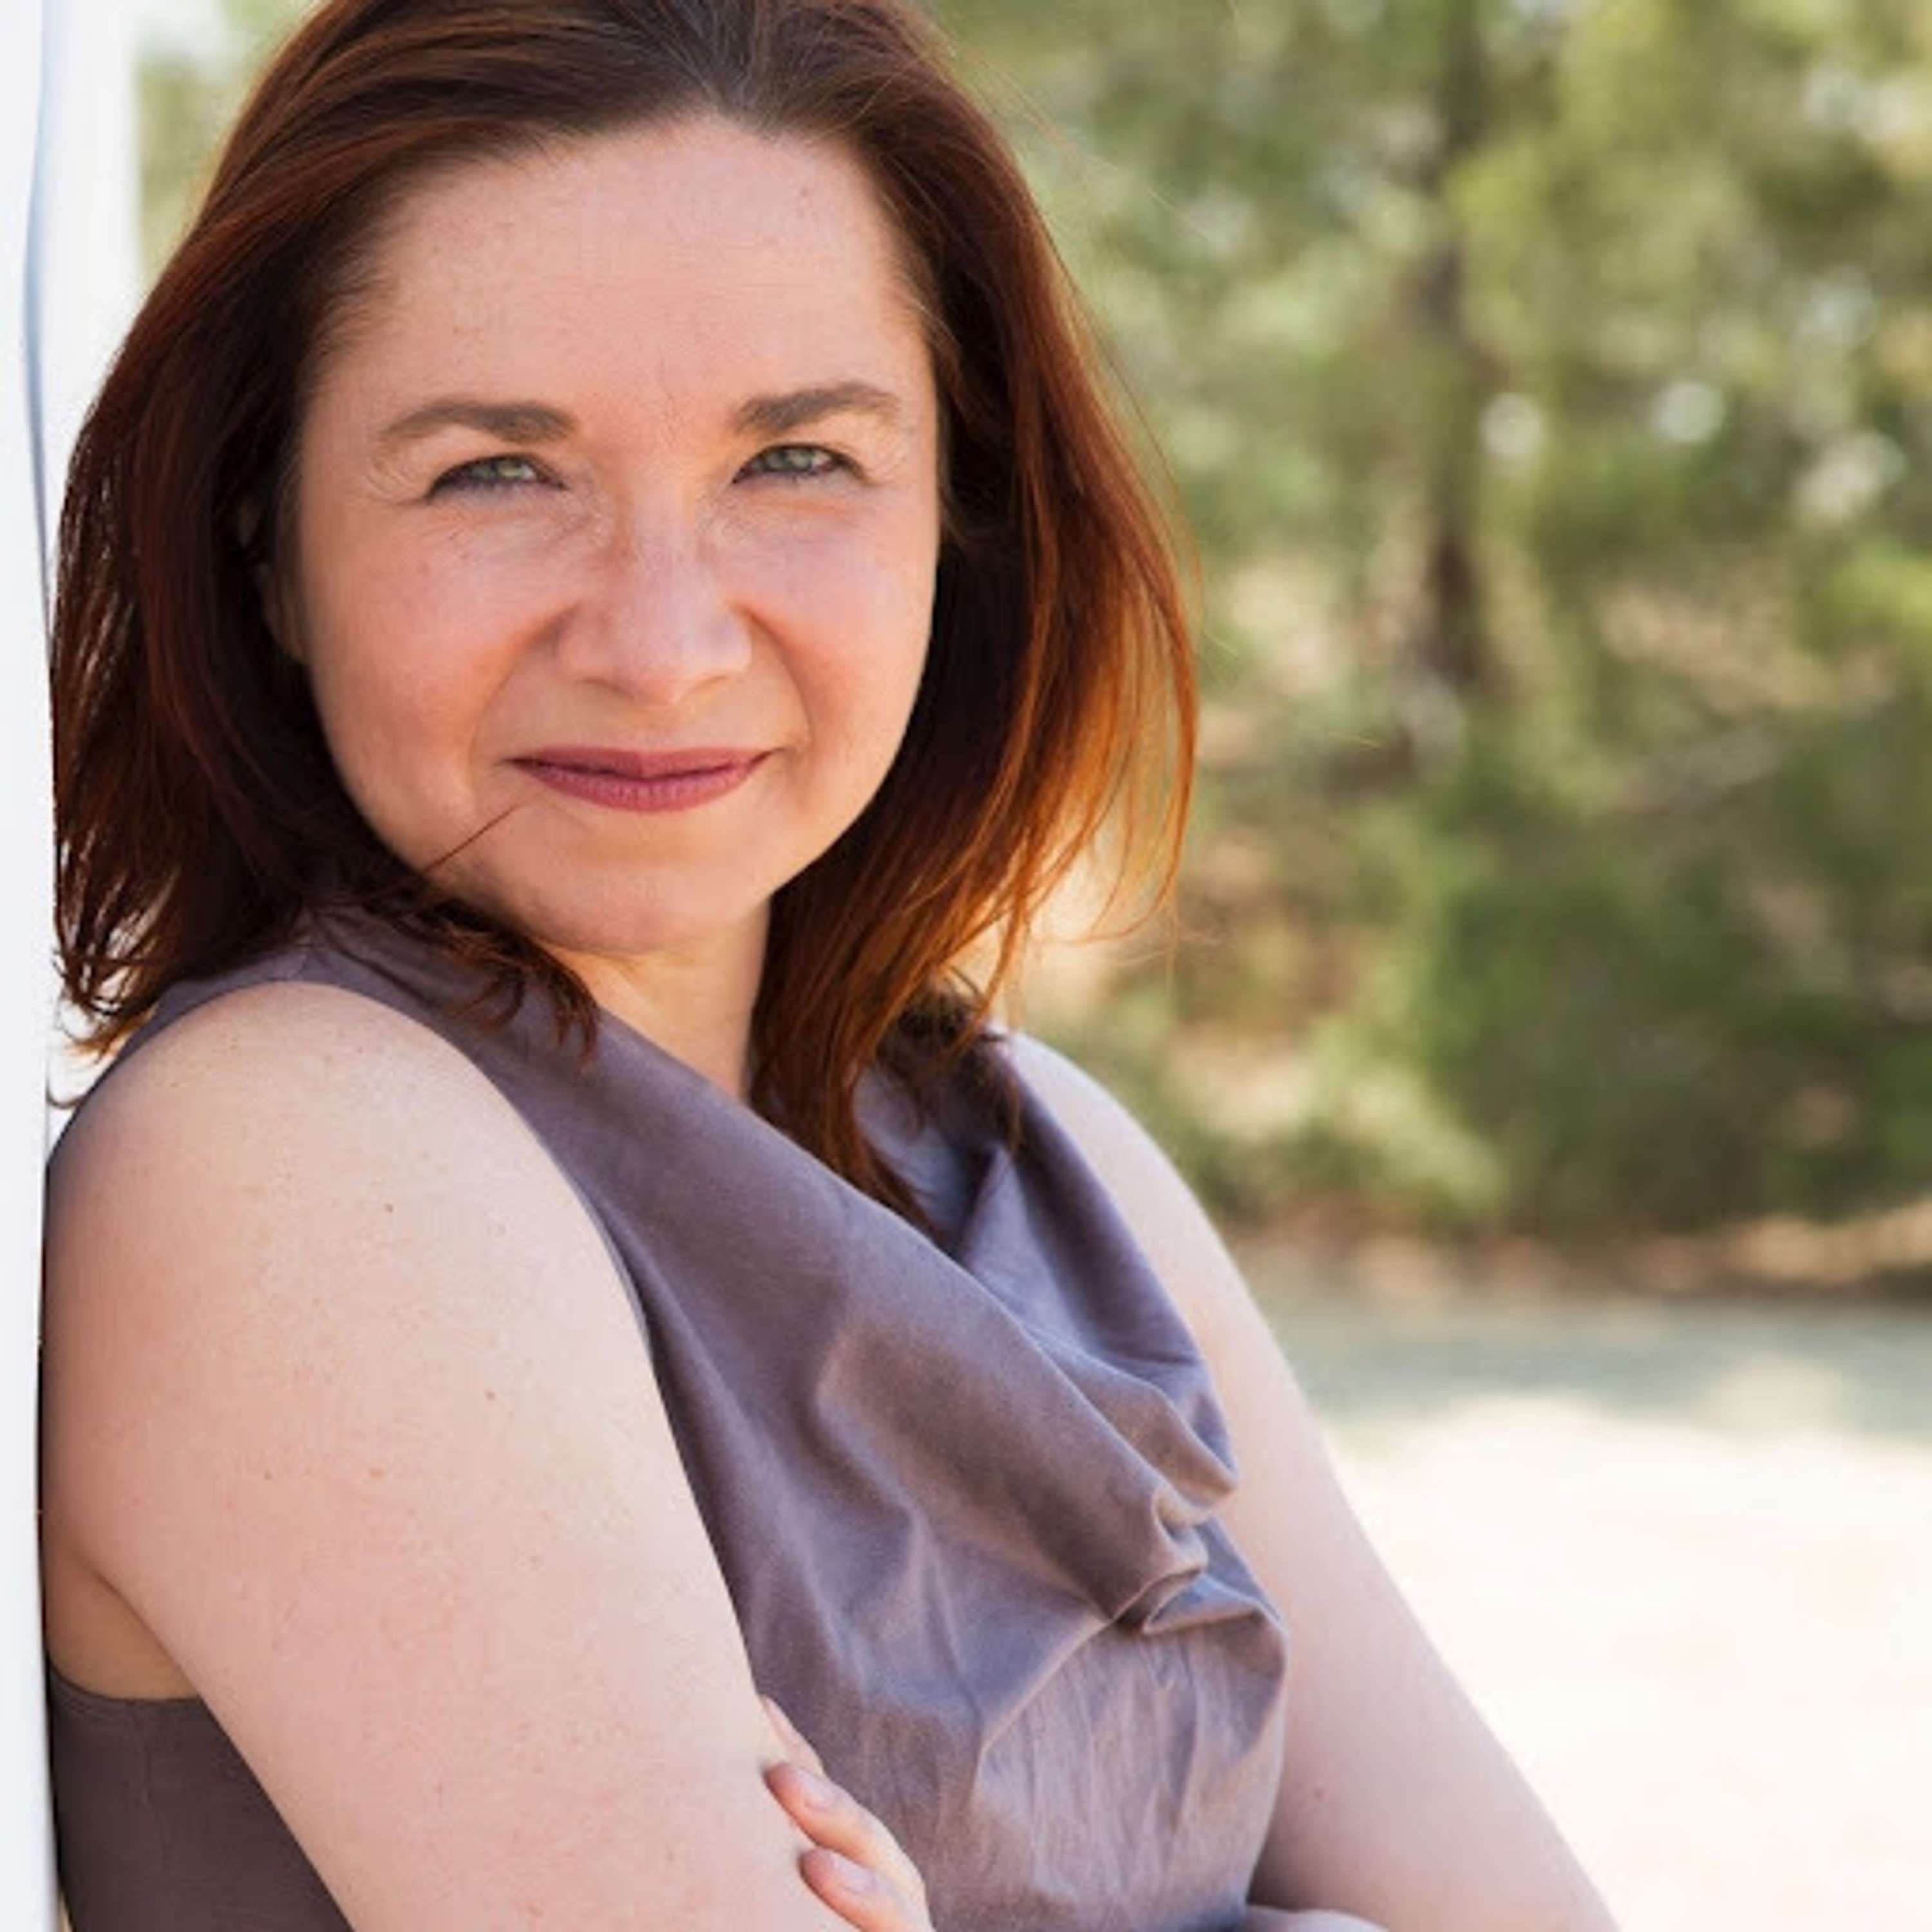 Episode 132: Interview with Professor Katharine Hayhoe on how to have a conversation on the highly politicised and divisive subject of climate change